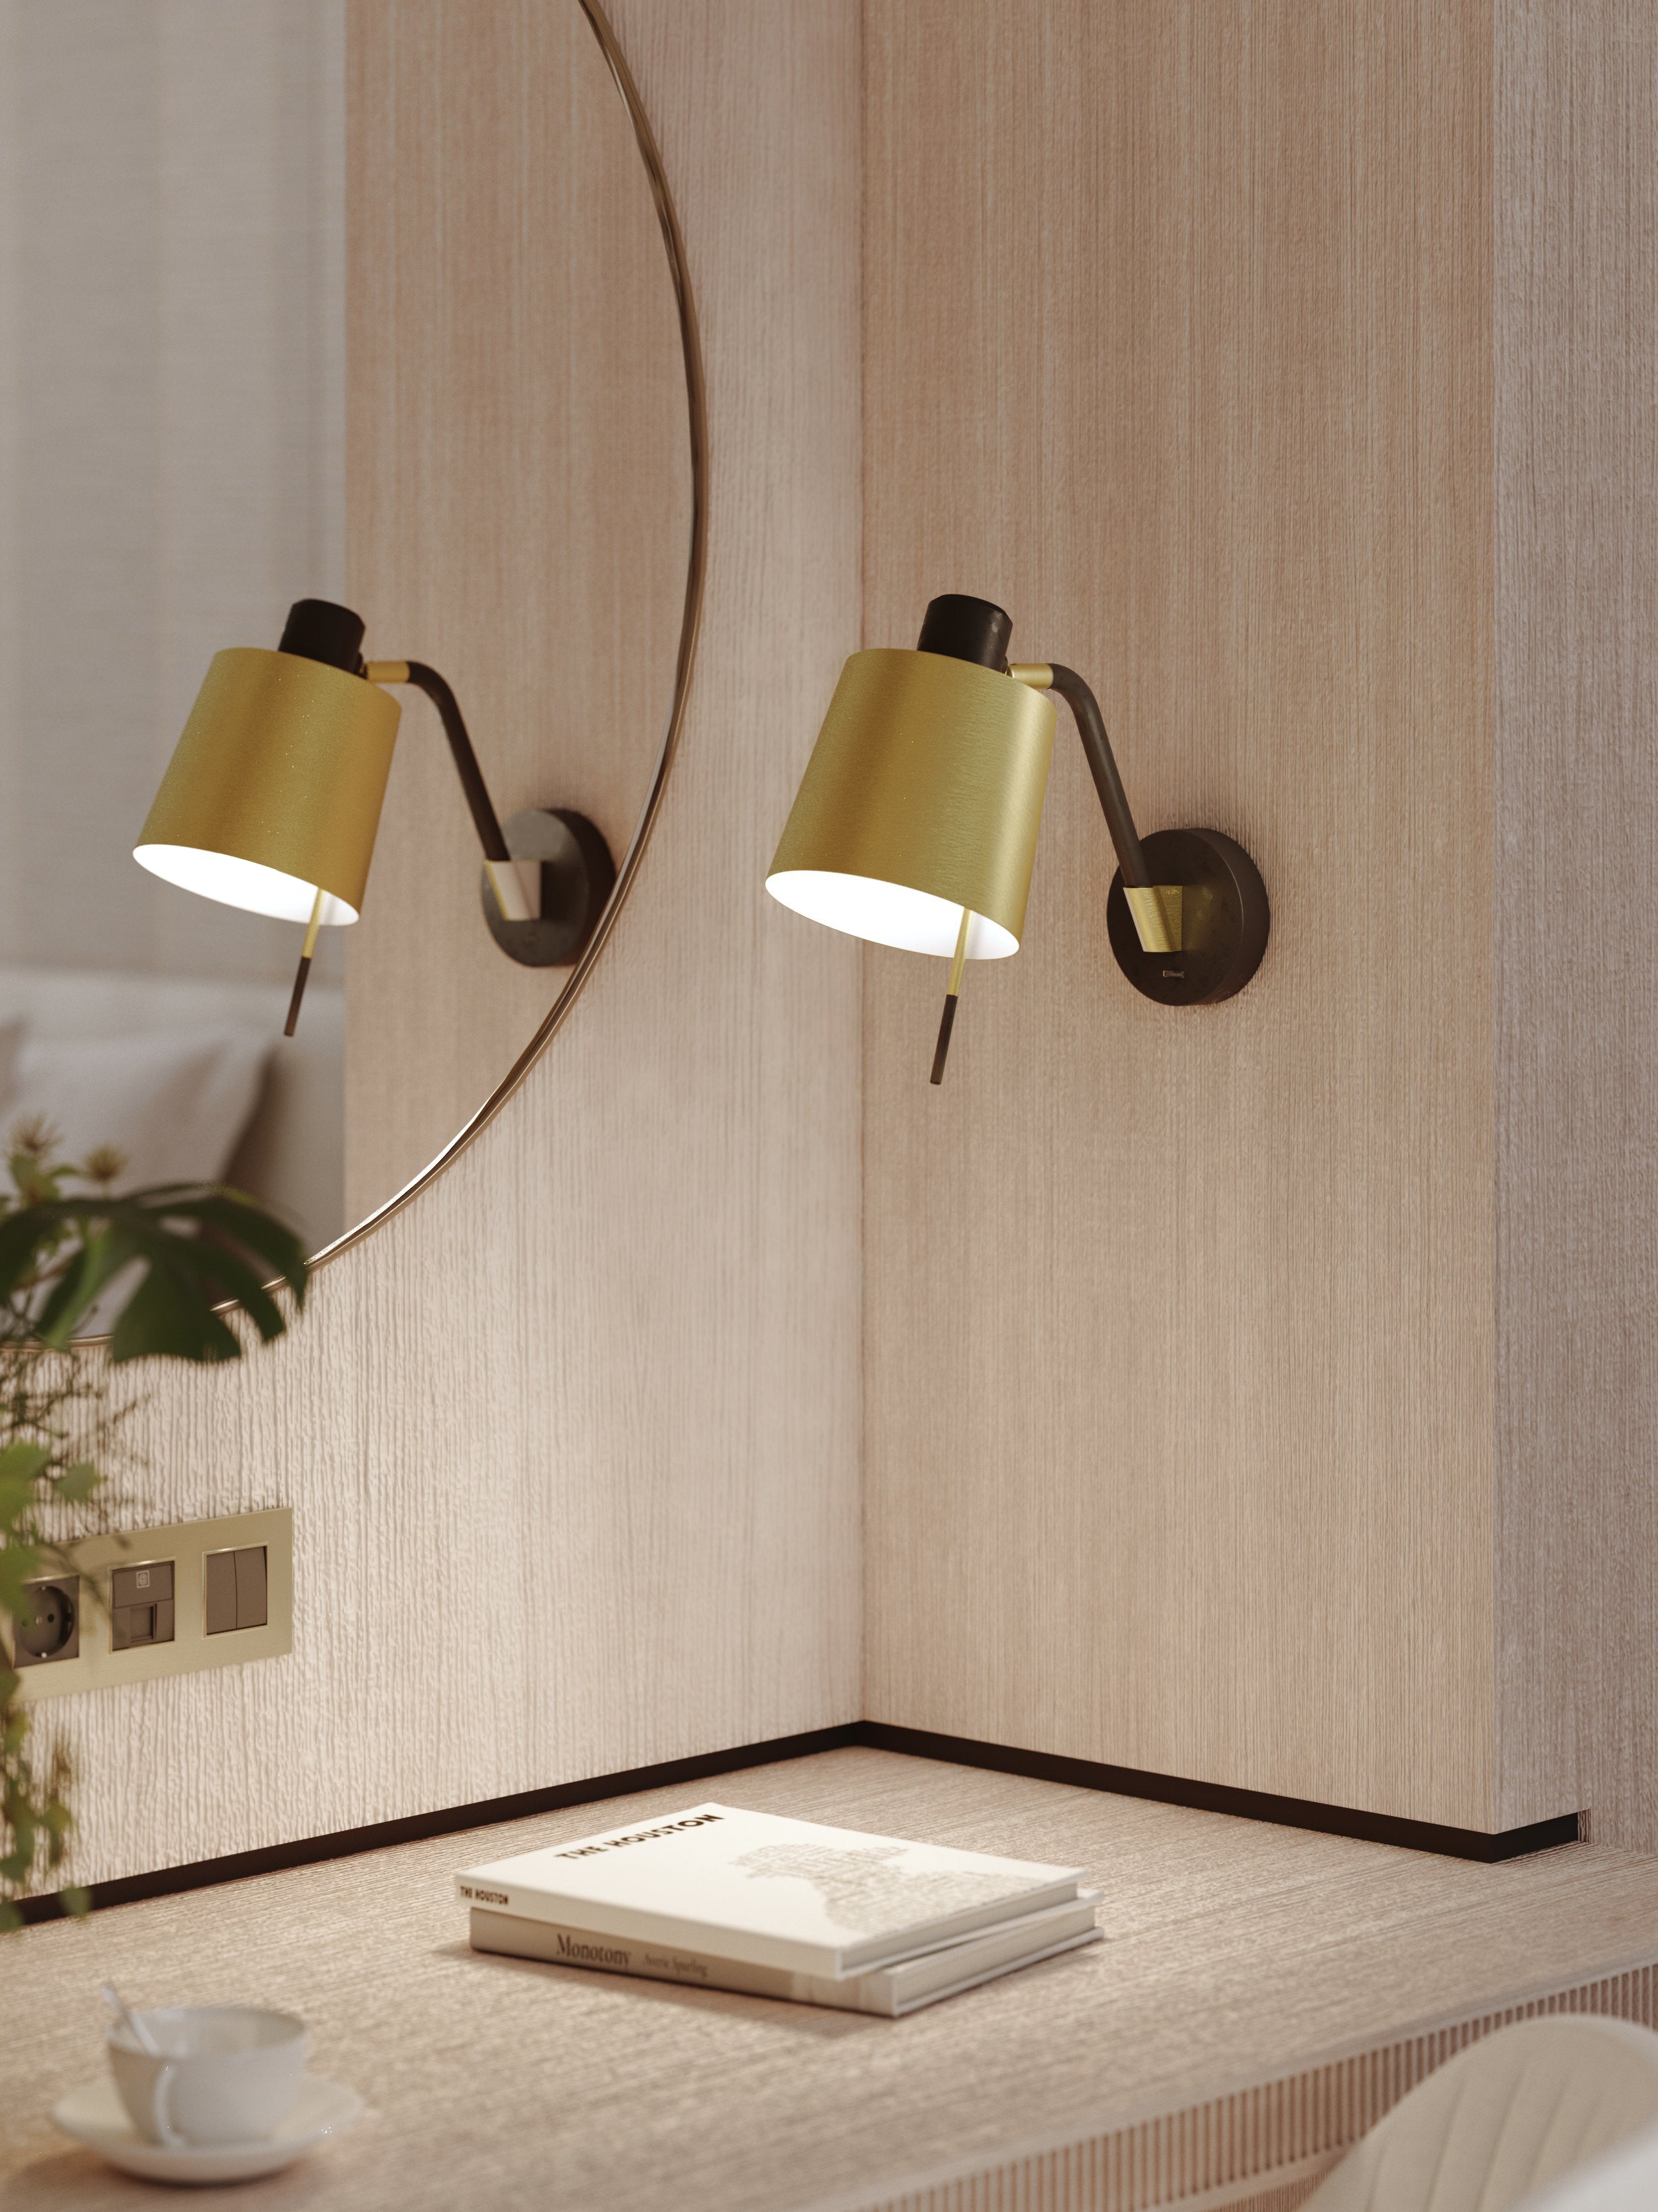 Astro Lighting Edward Wall Switched Wall Light Fixtures Astro Lighting   